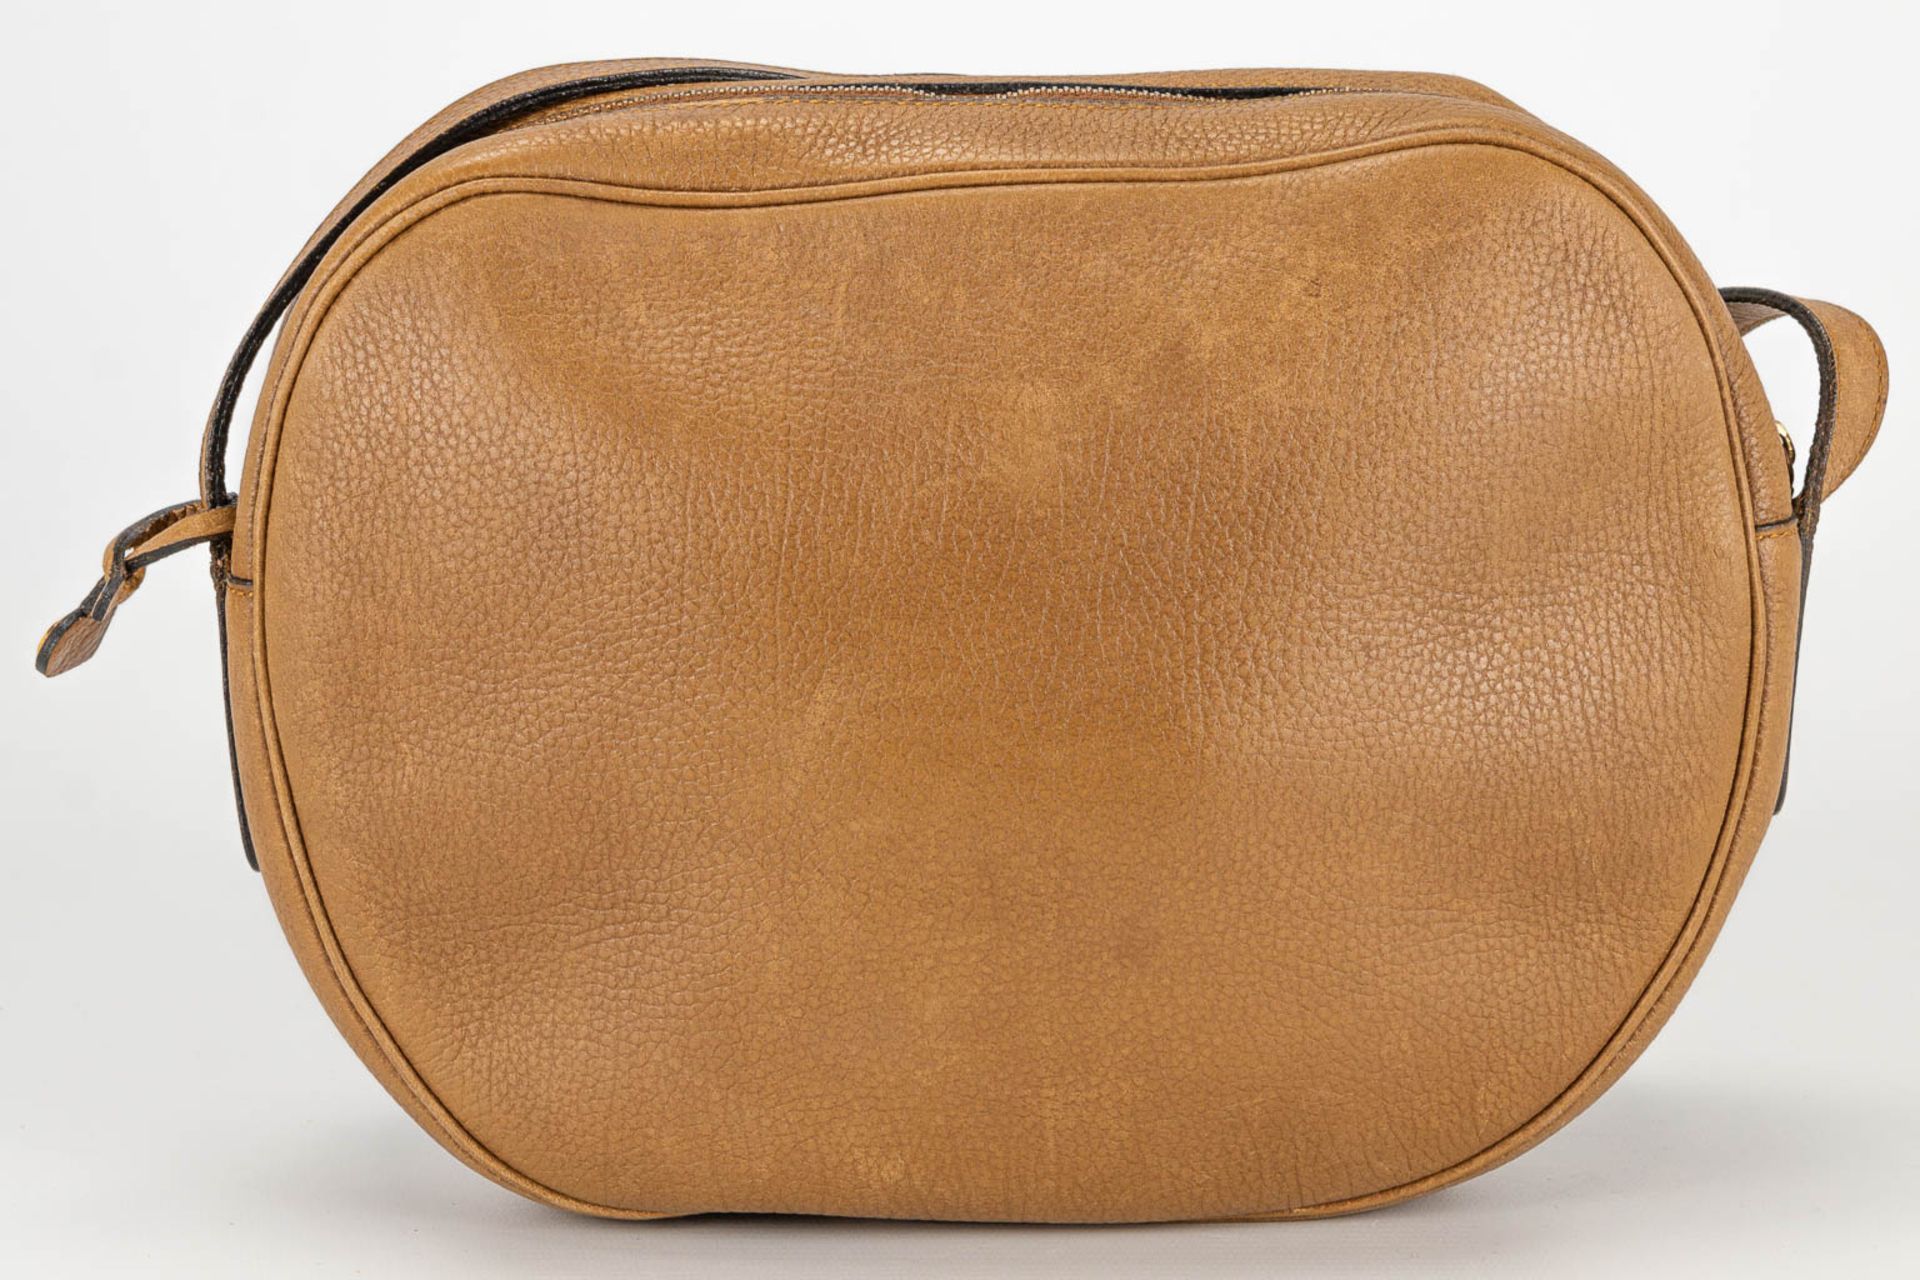 A purse made of brown leather and marked Delvaux - Image 10 of 14